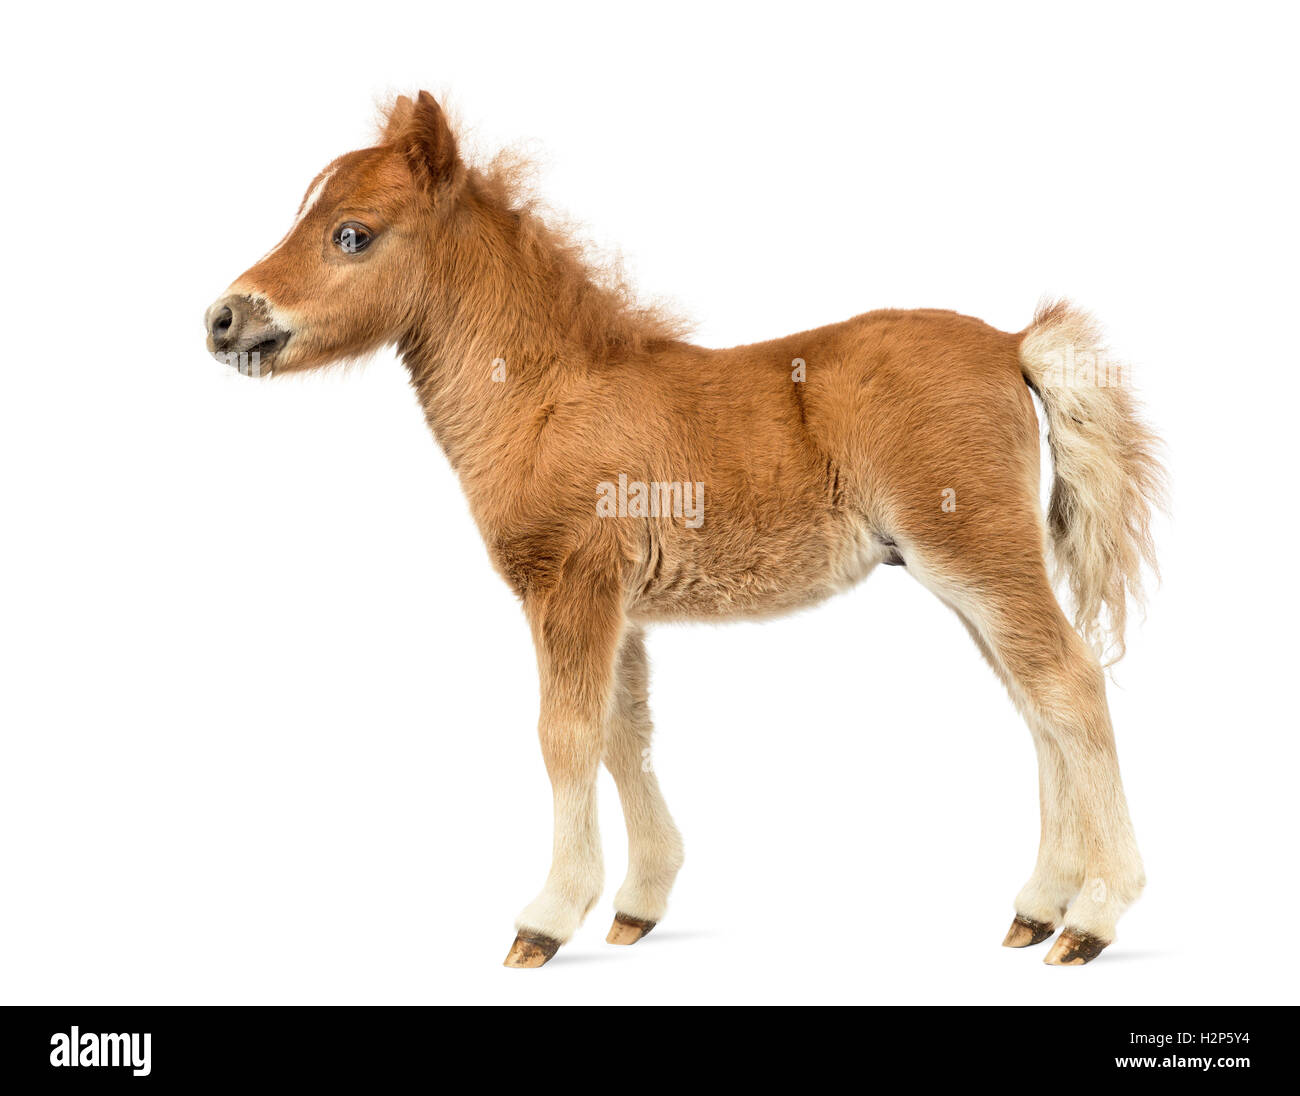 Side view of a young poney, foal against white background Stock Photo